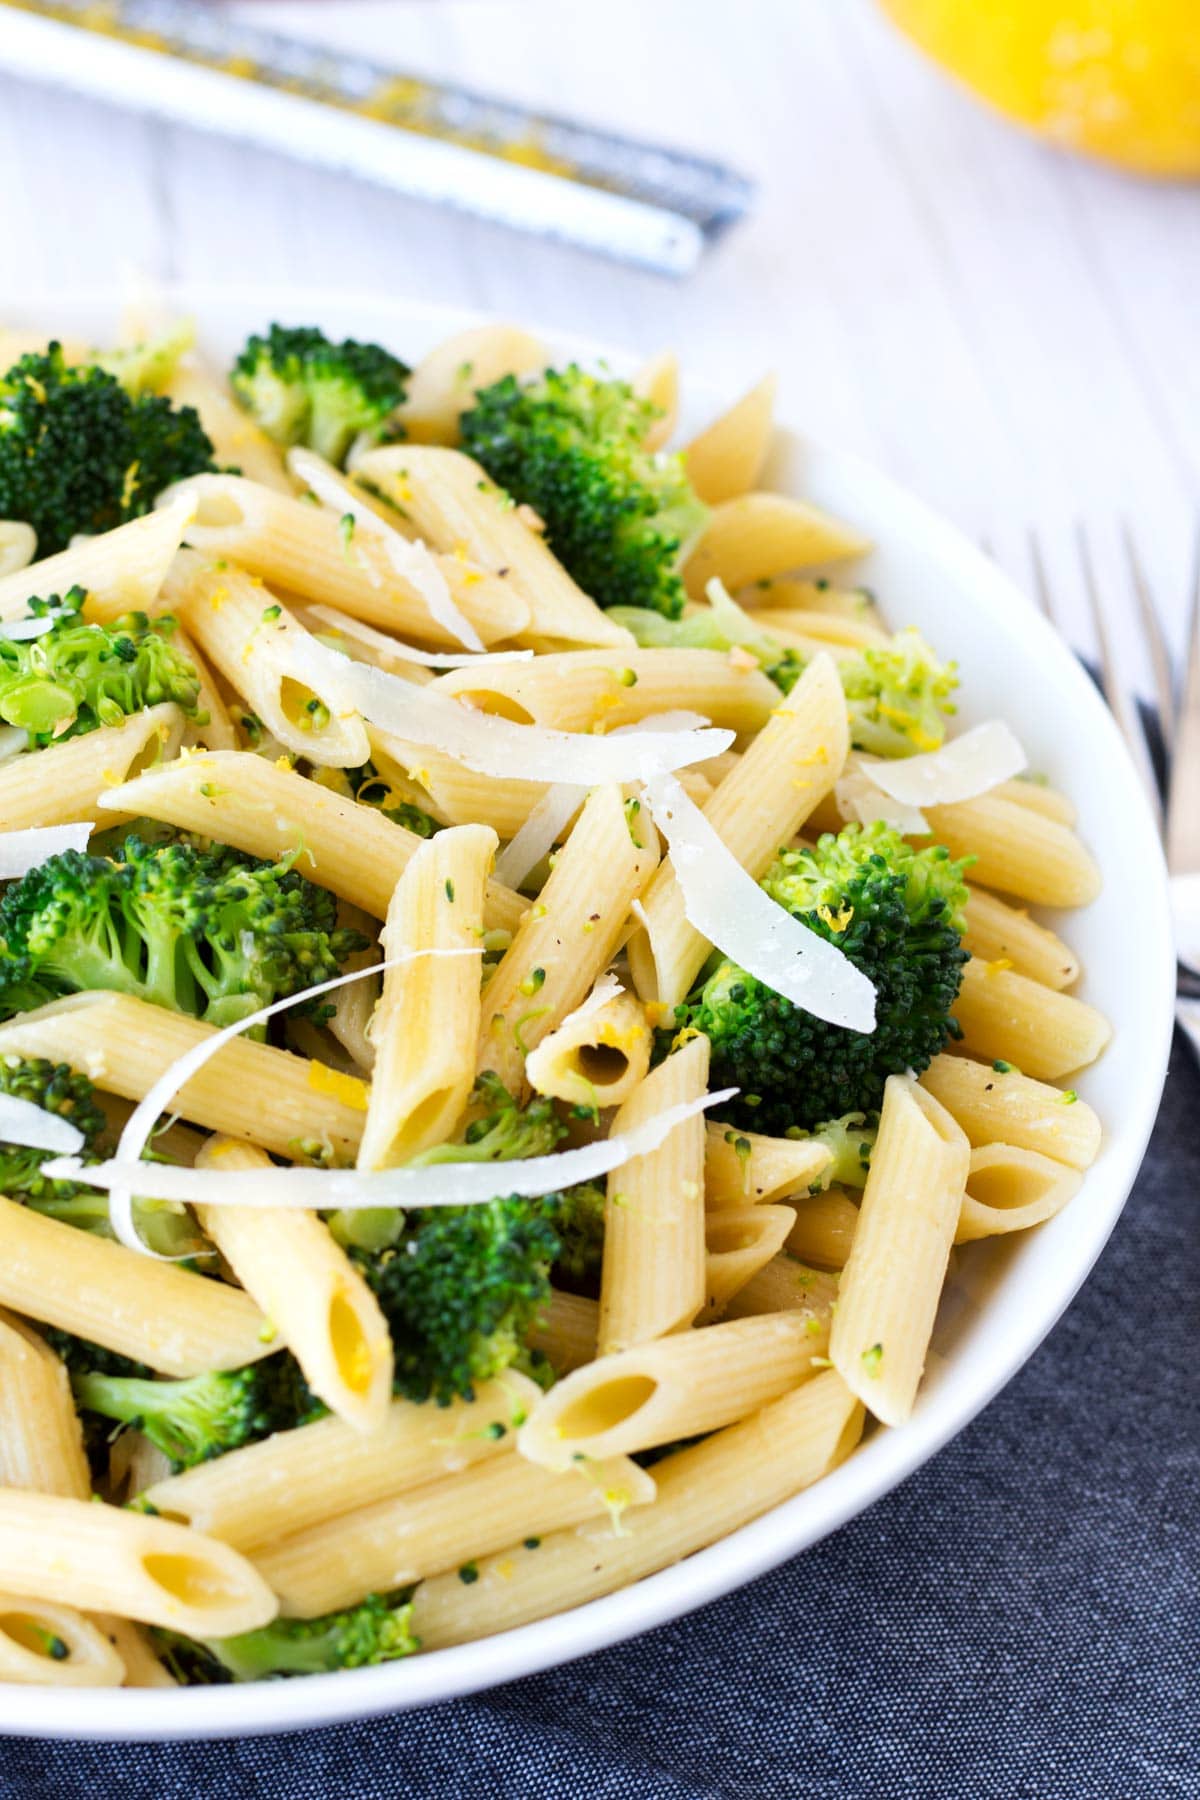 Pasta with broccoli, grated parmesan, and lemon sauce in a white bowl with a gray towel and forks on the side.